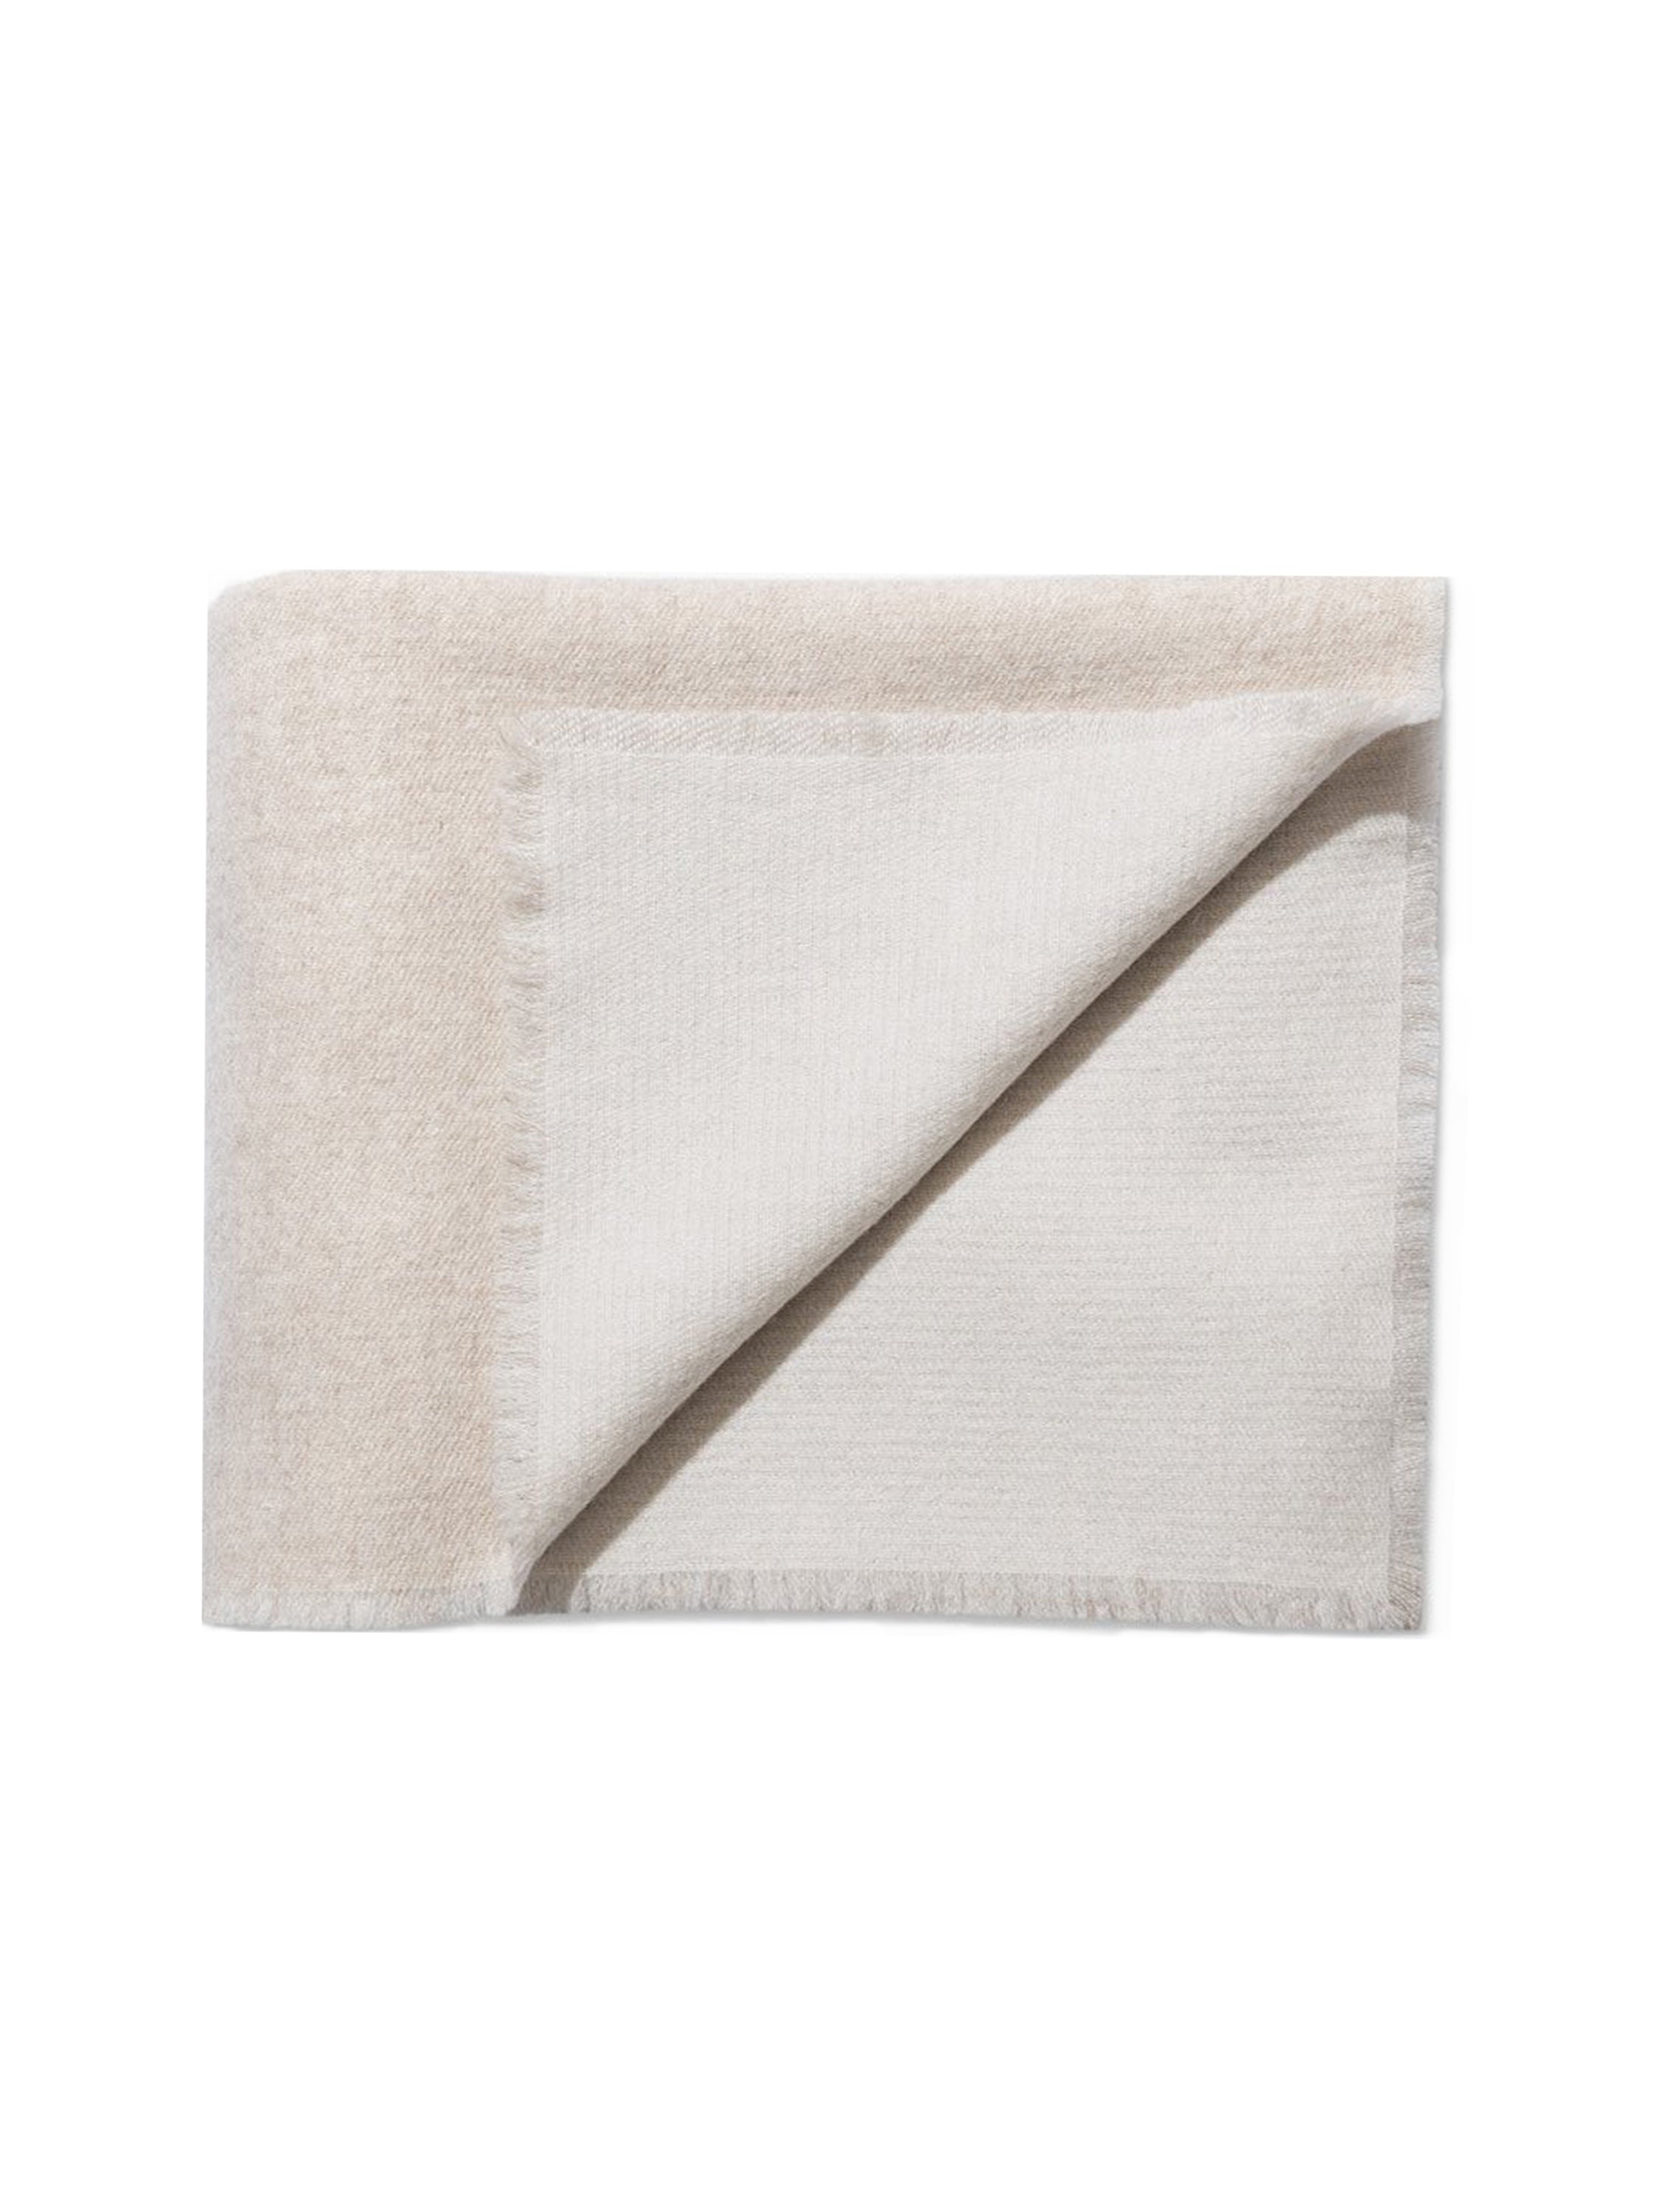 Double Sided Cashmere Throw - Oatmeal / Ivory | Ben Soleimani